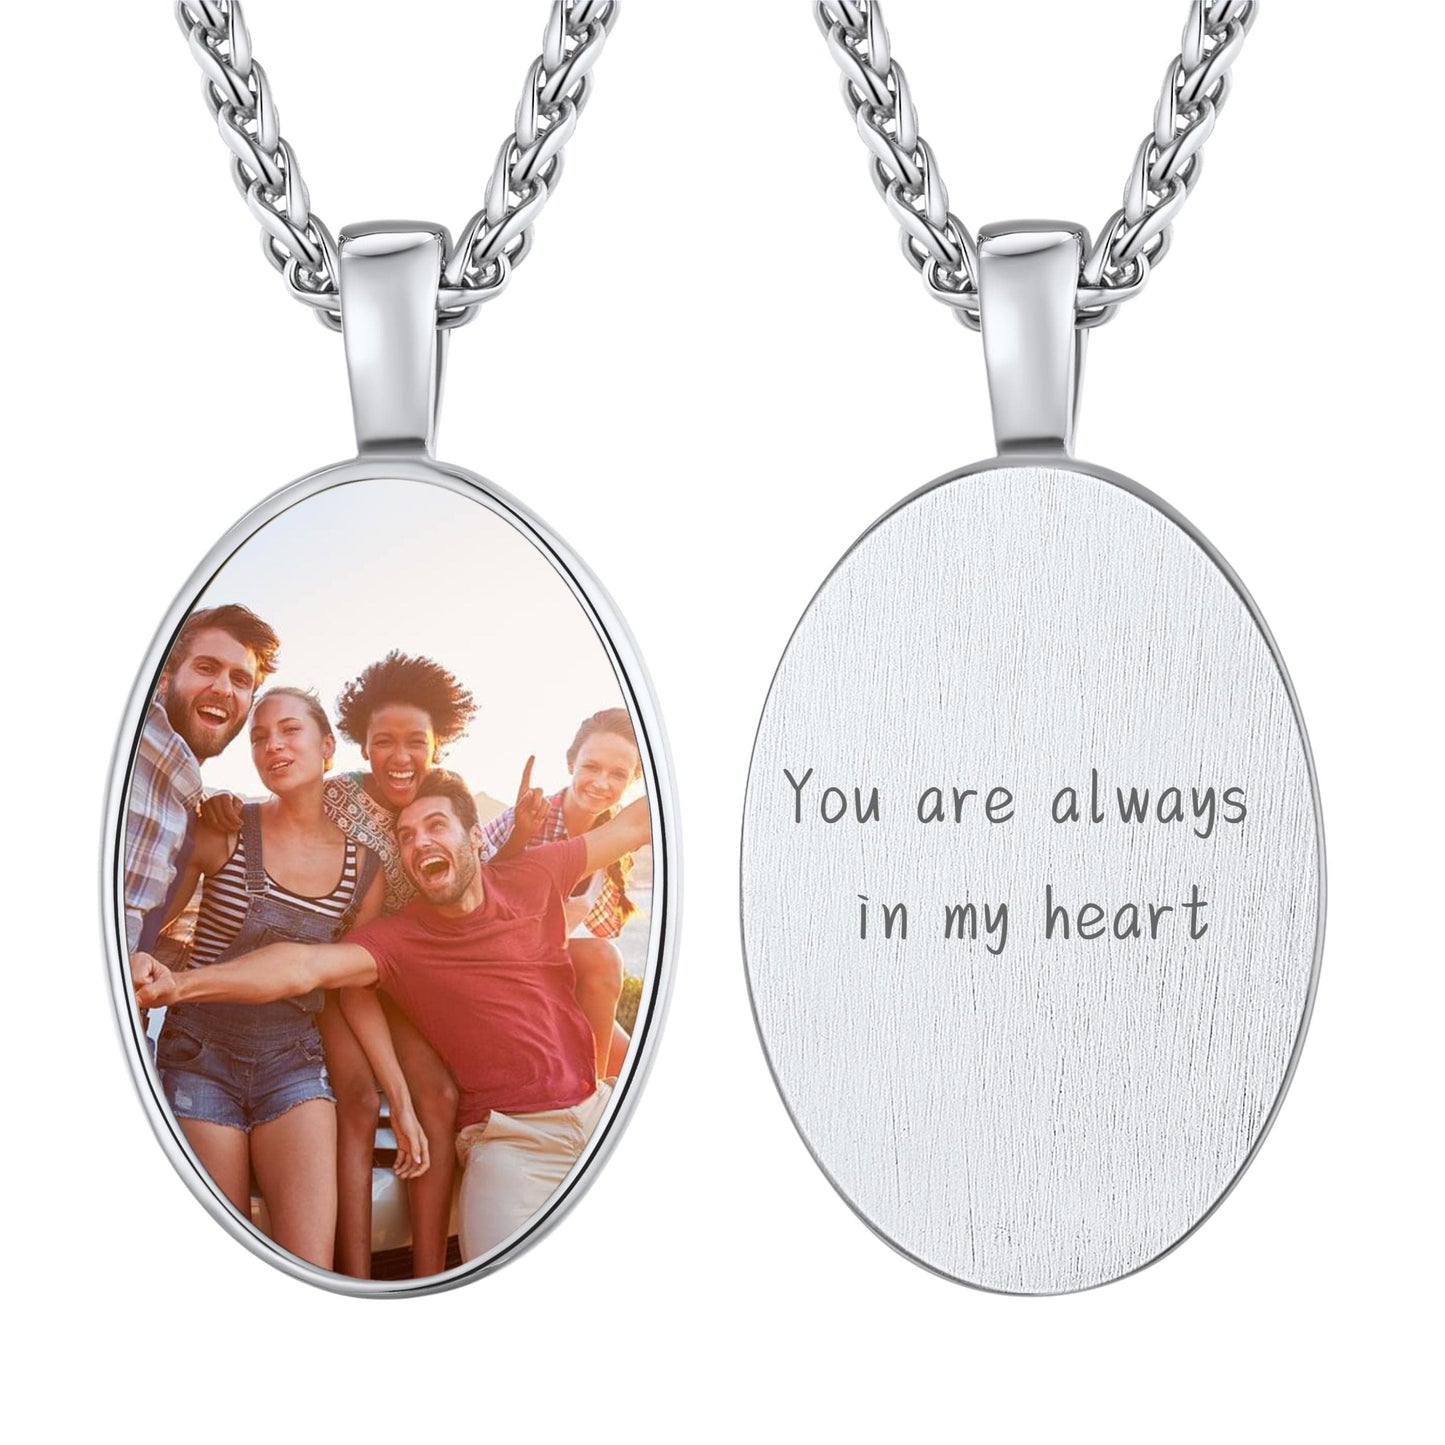 Birthstonesjewelry Personalized Oval Photo Necklace with Message Steel